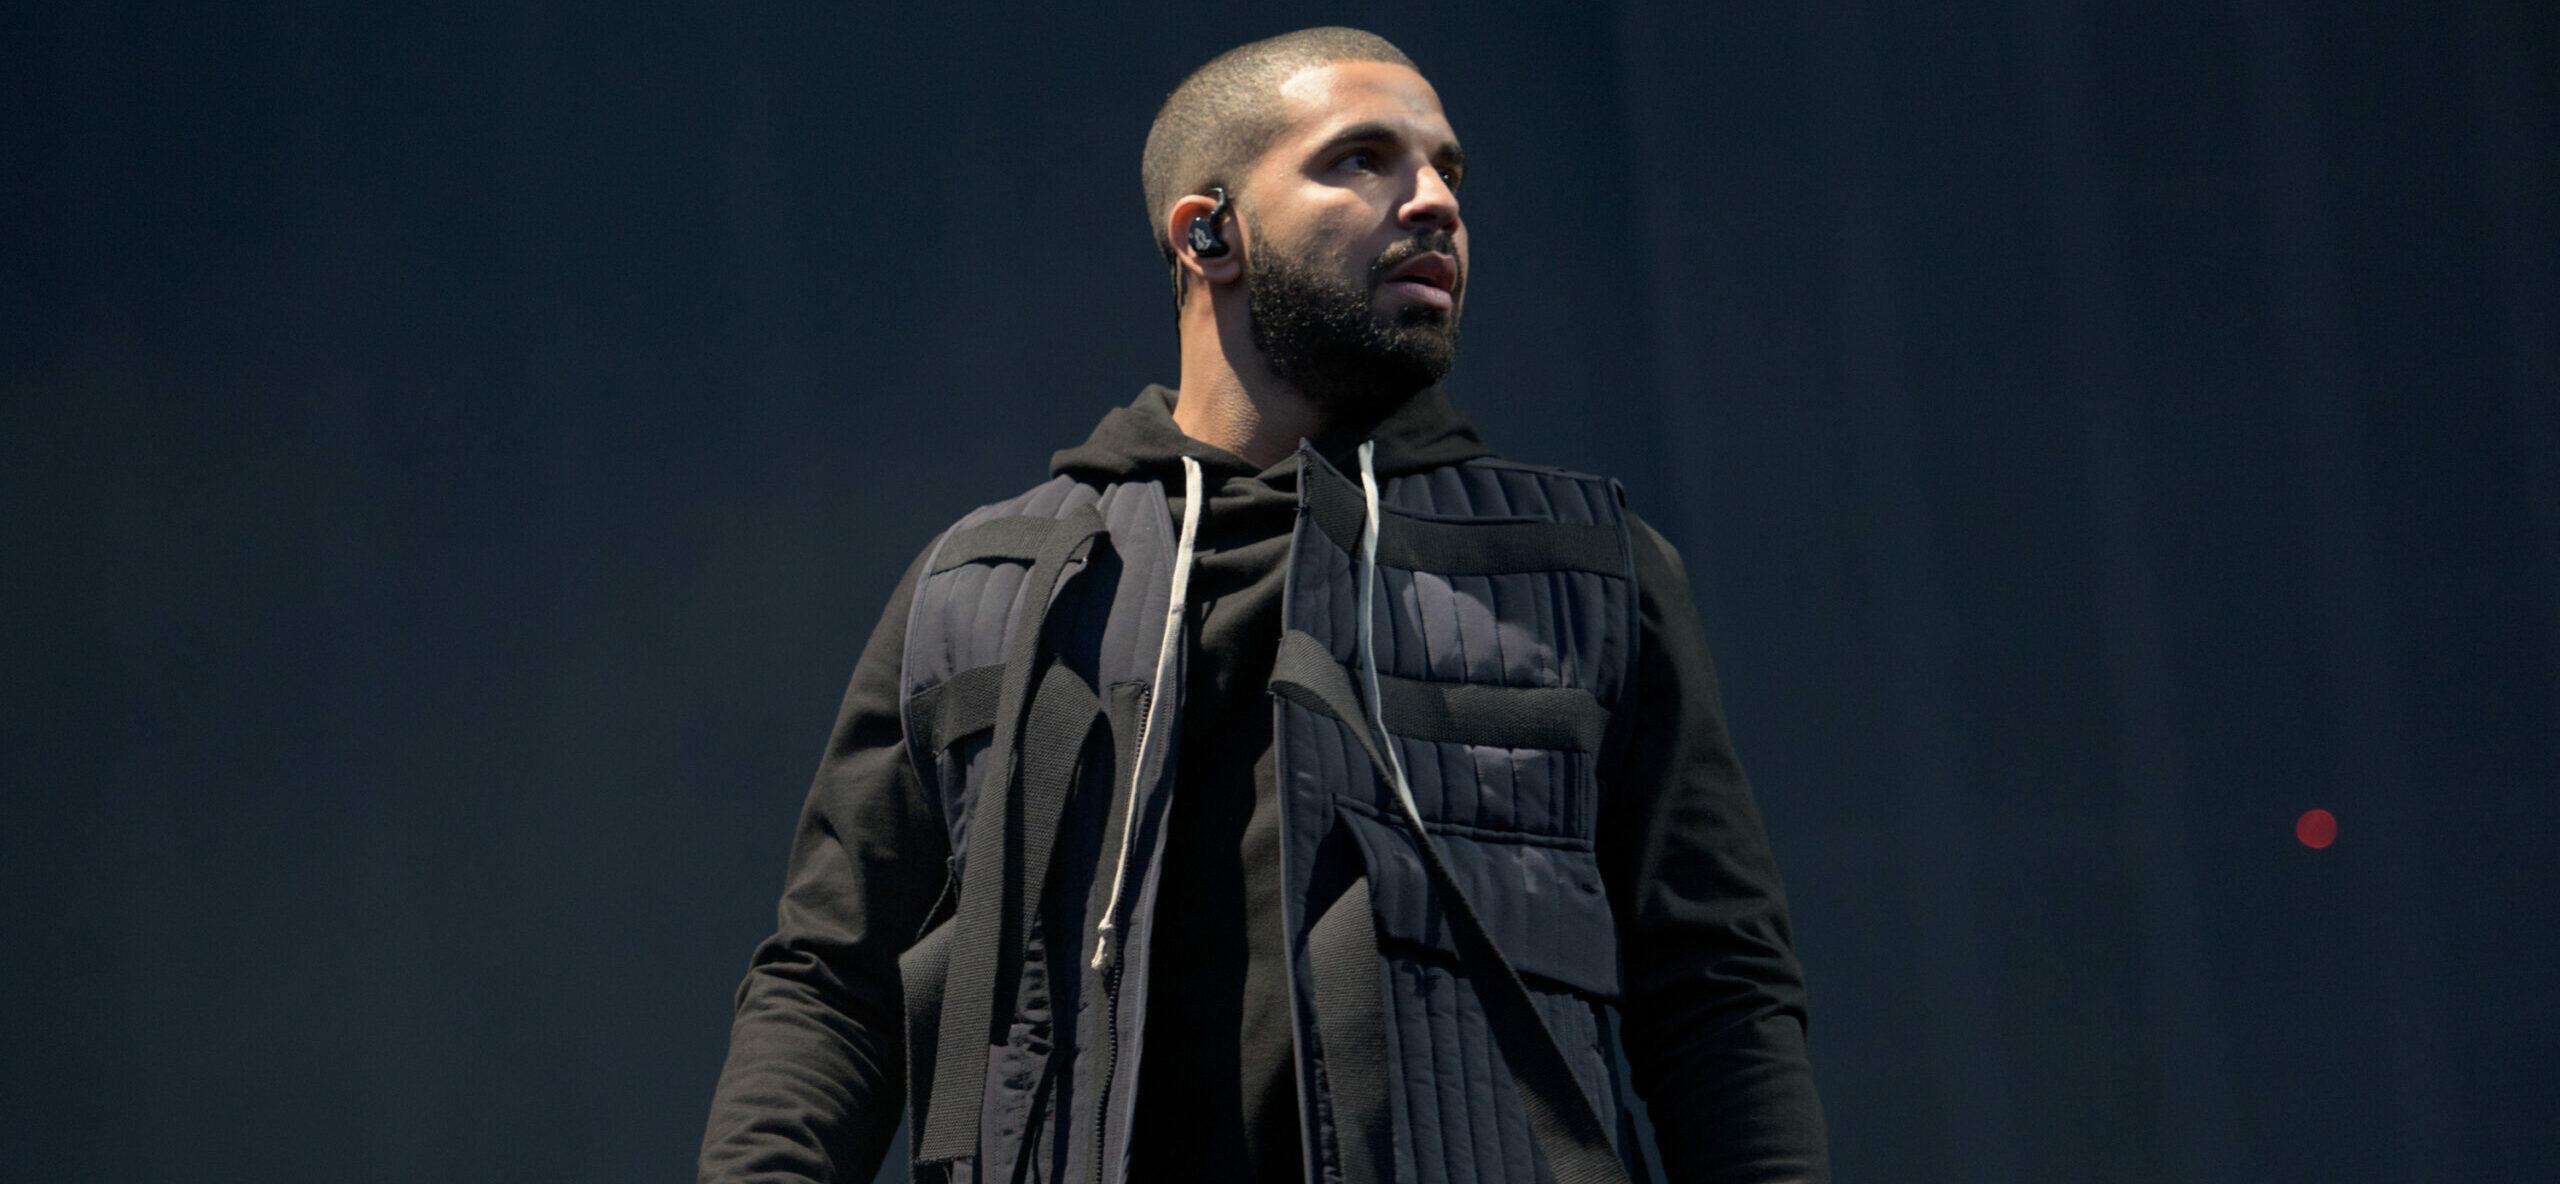 Drake Slammed With Lawsuit By Ghanaian Rapper Over Alleged Unauthorized Song Sample